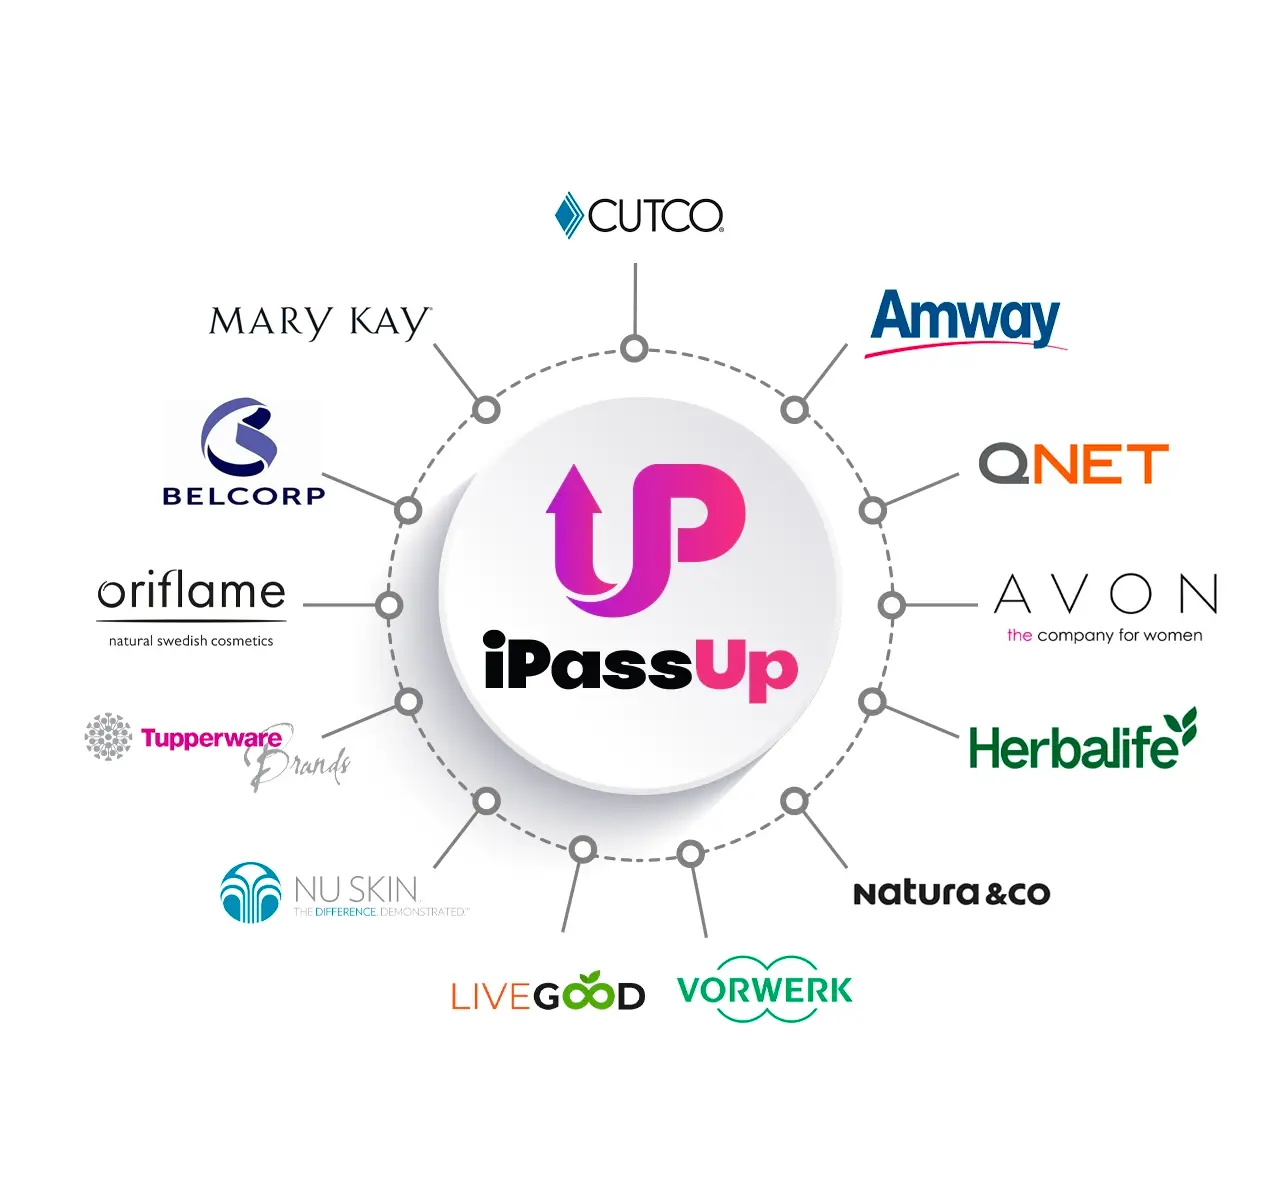 Passup MLM Programming Easy1up 2up-system infinity mlm plan Avon Belcorp Tupperware QNET DXN Easy1Up Oriflame Script